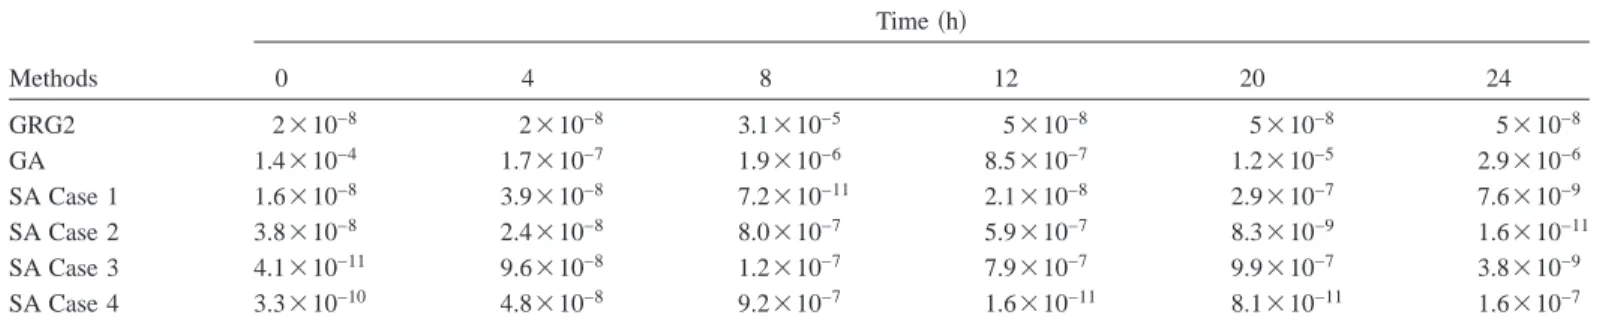 Table 3. Temporal Values of the Objective Function Calculated Based on Eq. 共12兲